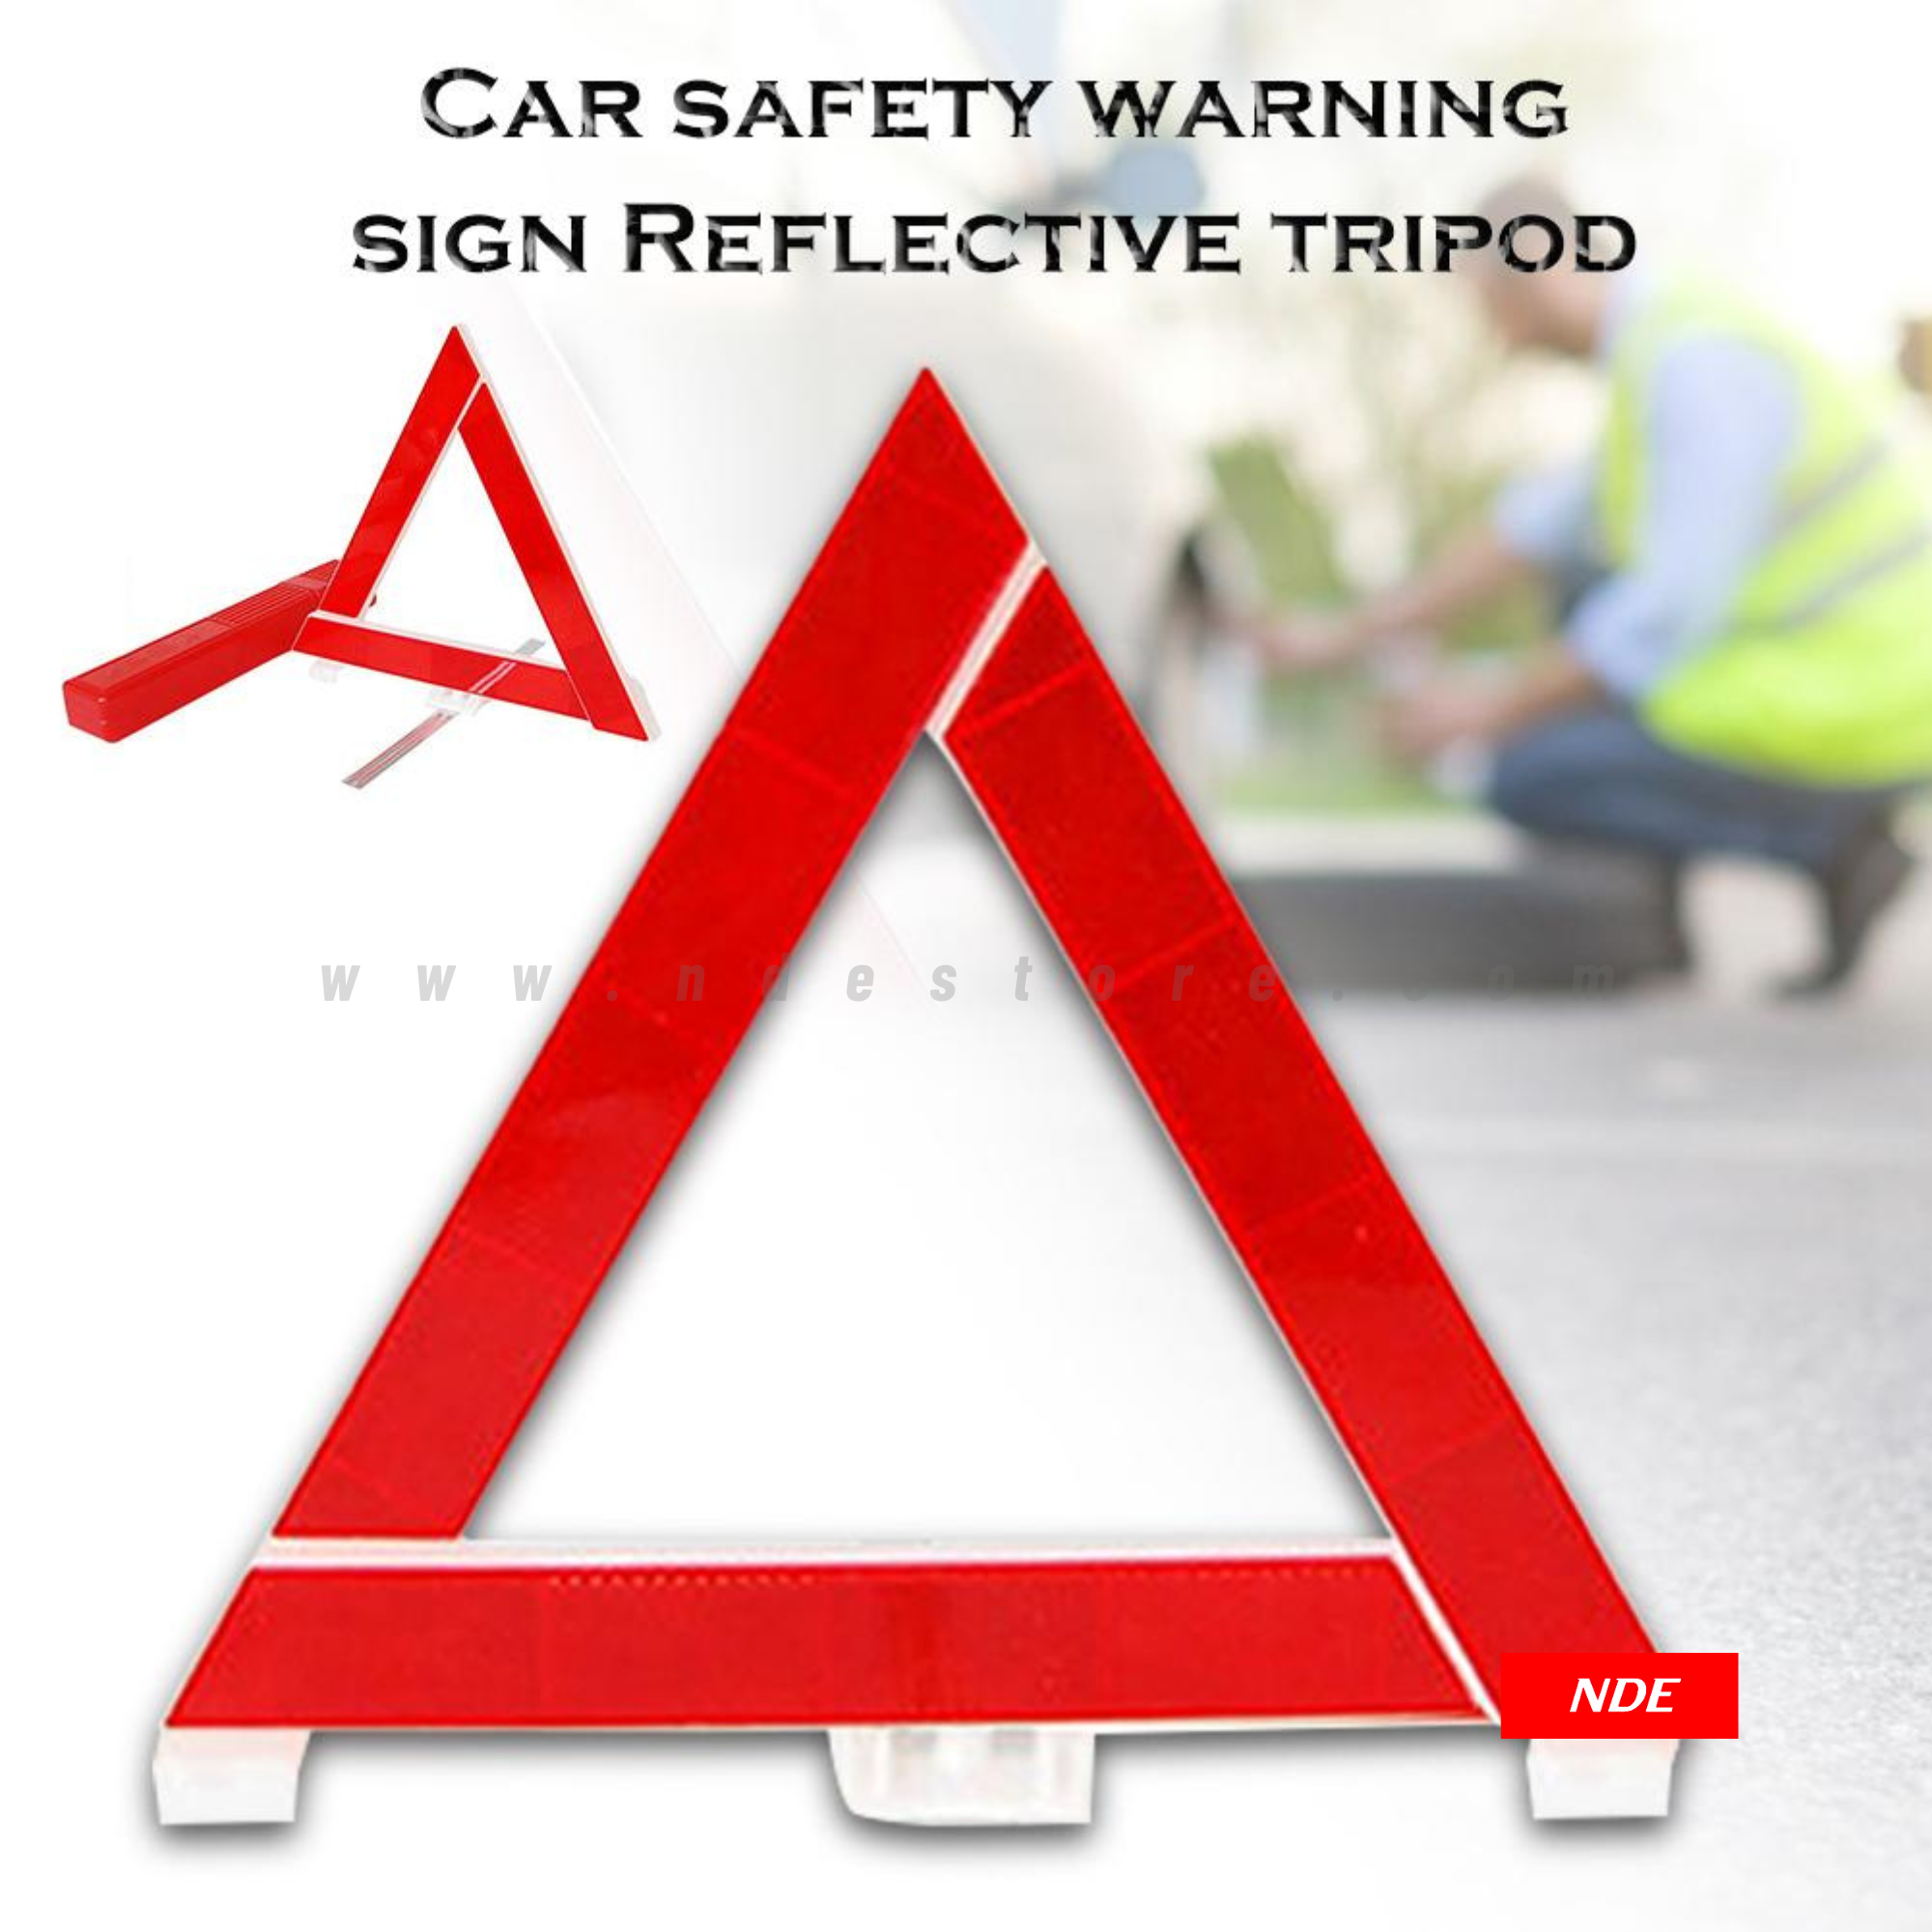 SAFETY WARNING SIGN TRIANGLE REFLECTIVE